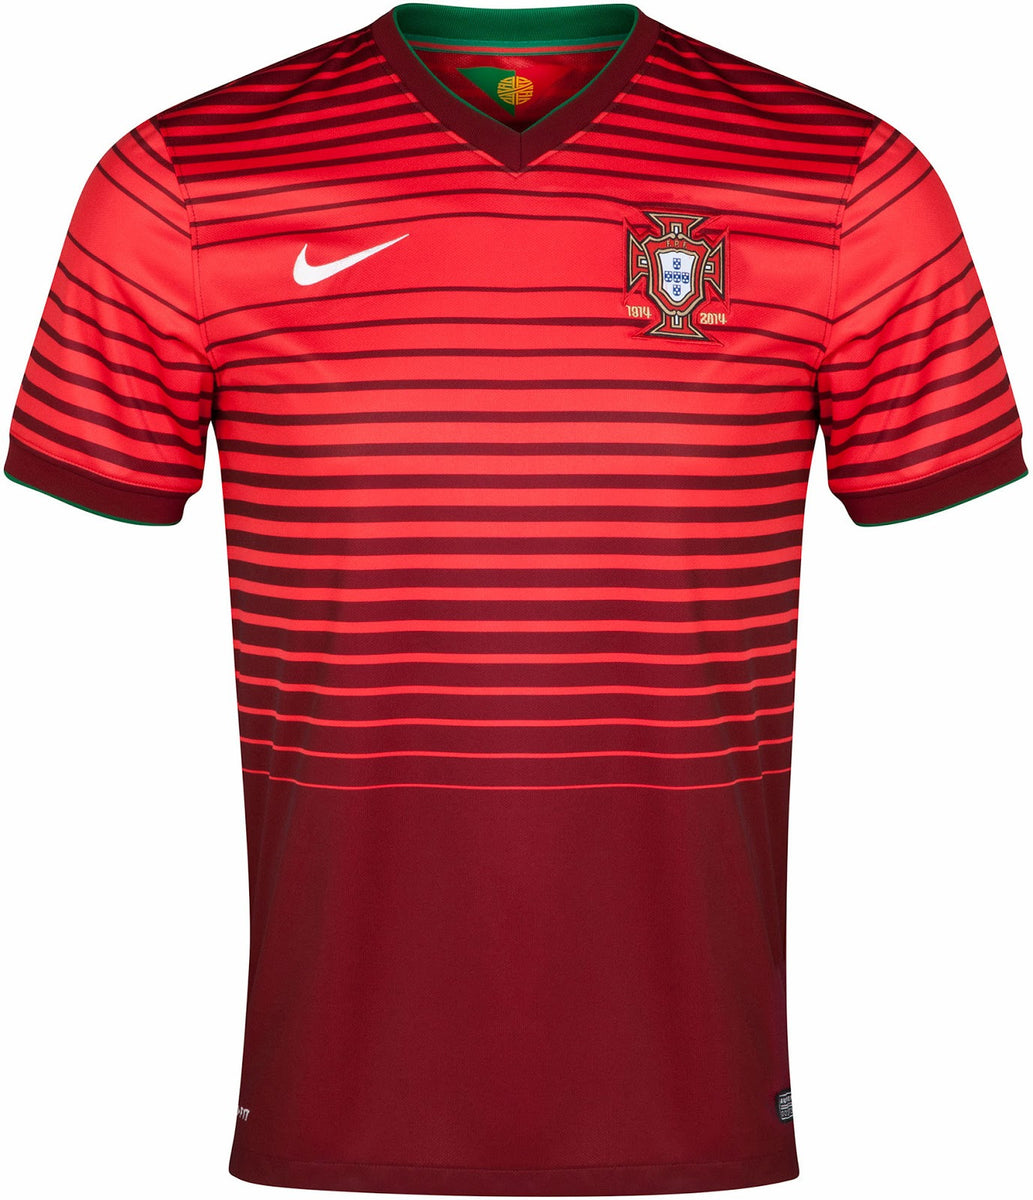 2014 portugal world cup jersey away 